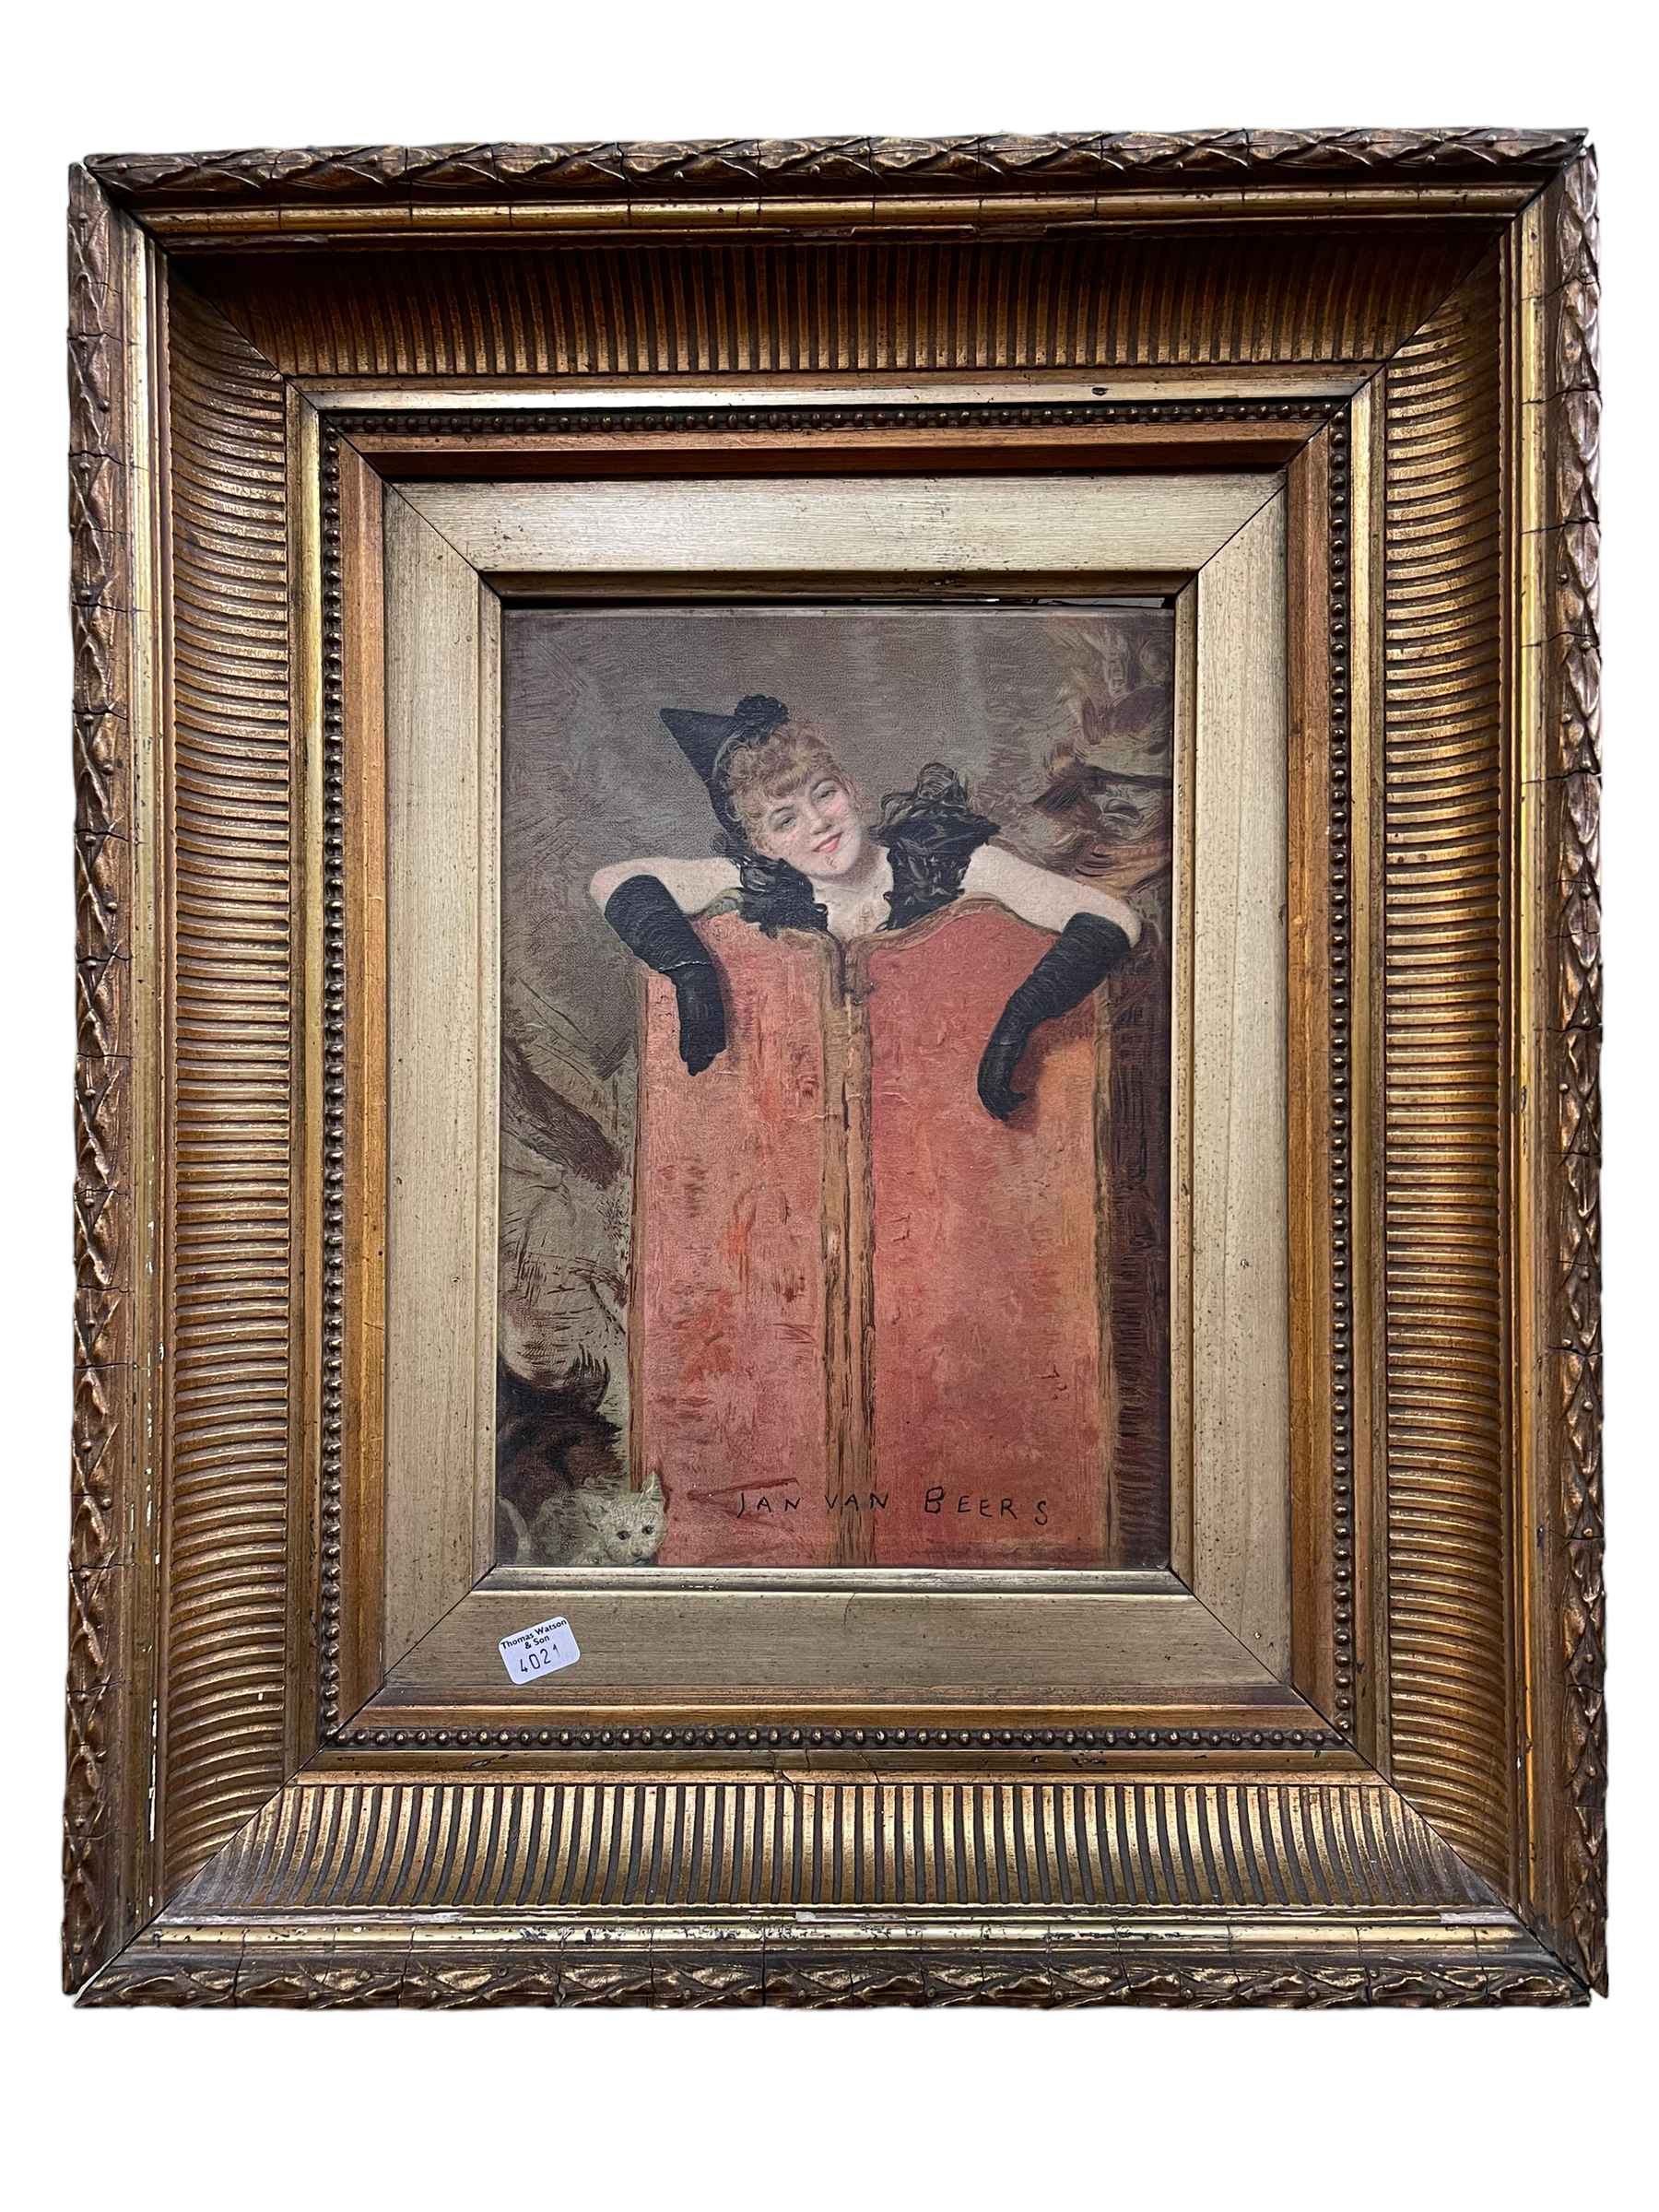 Jan Van Beers, Pierrot looking over a Screen, oil on panel, signed, 25cm by 17.5cm, in gilt frame.